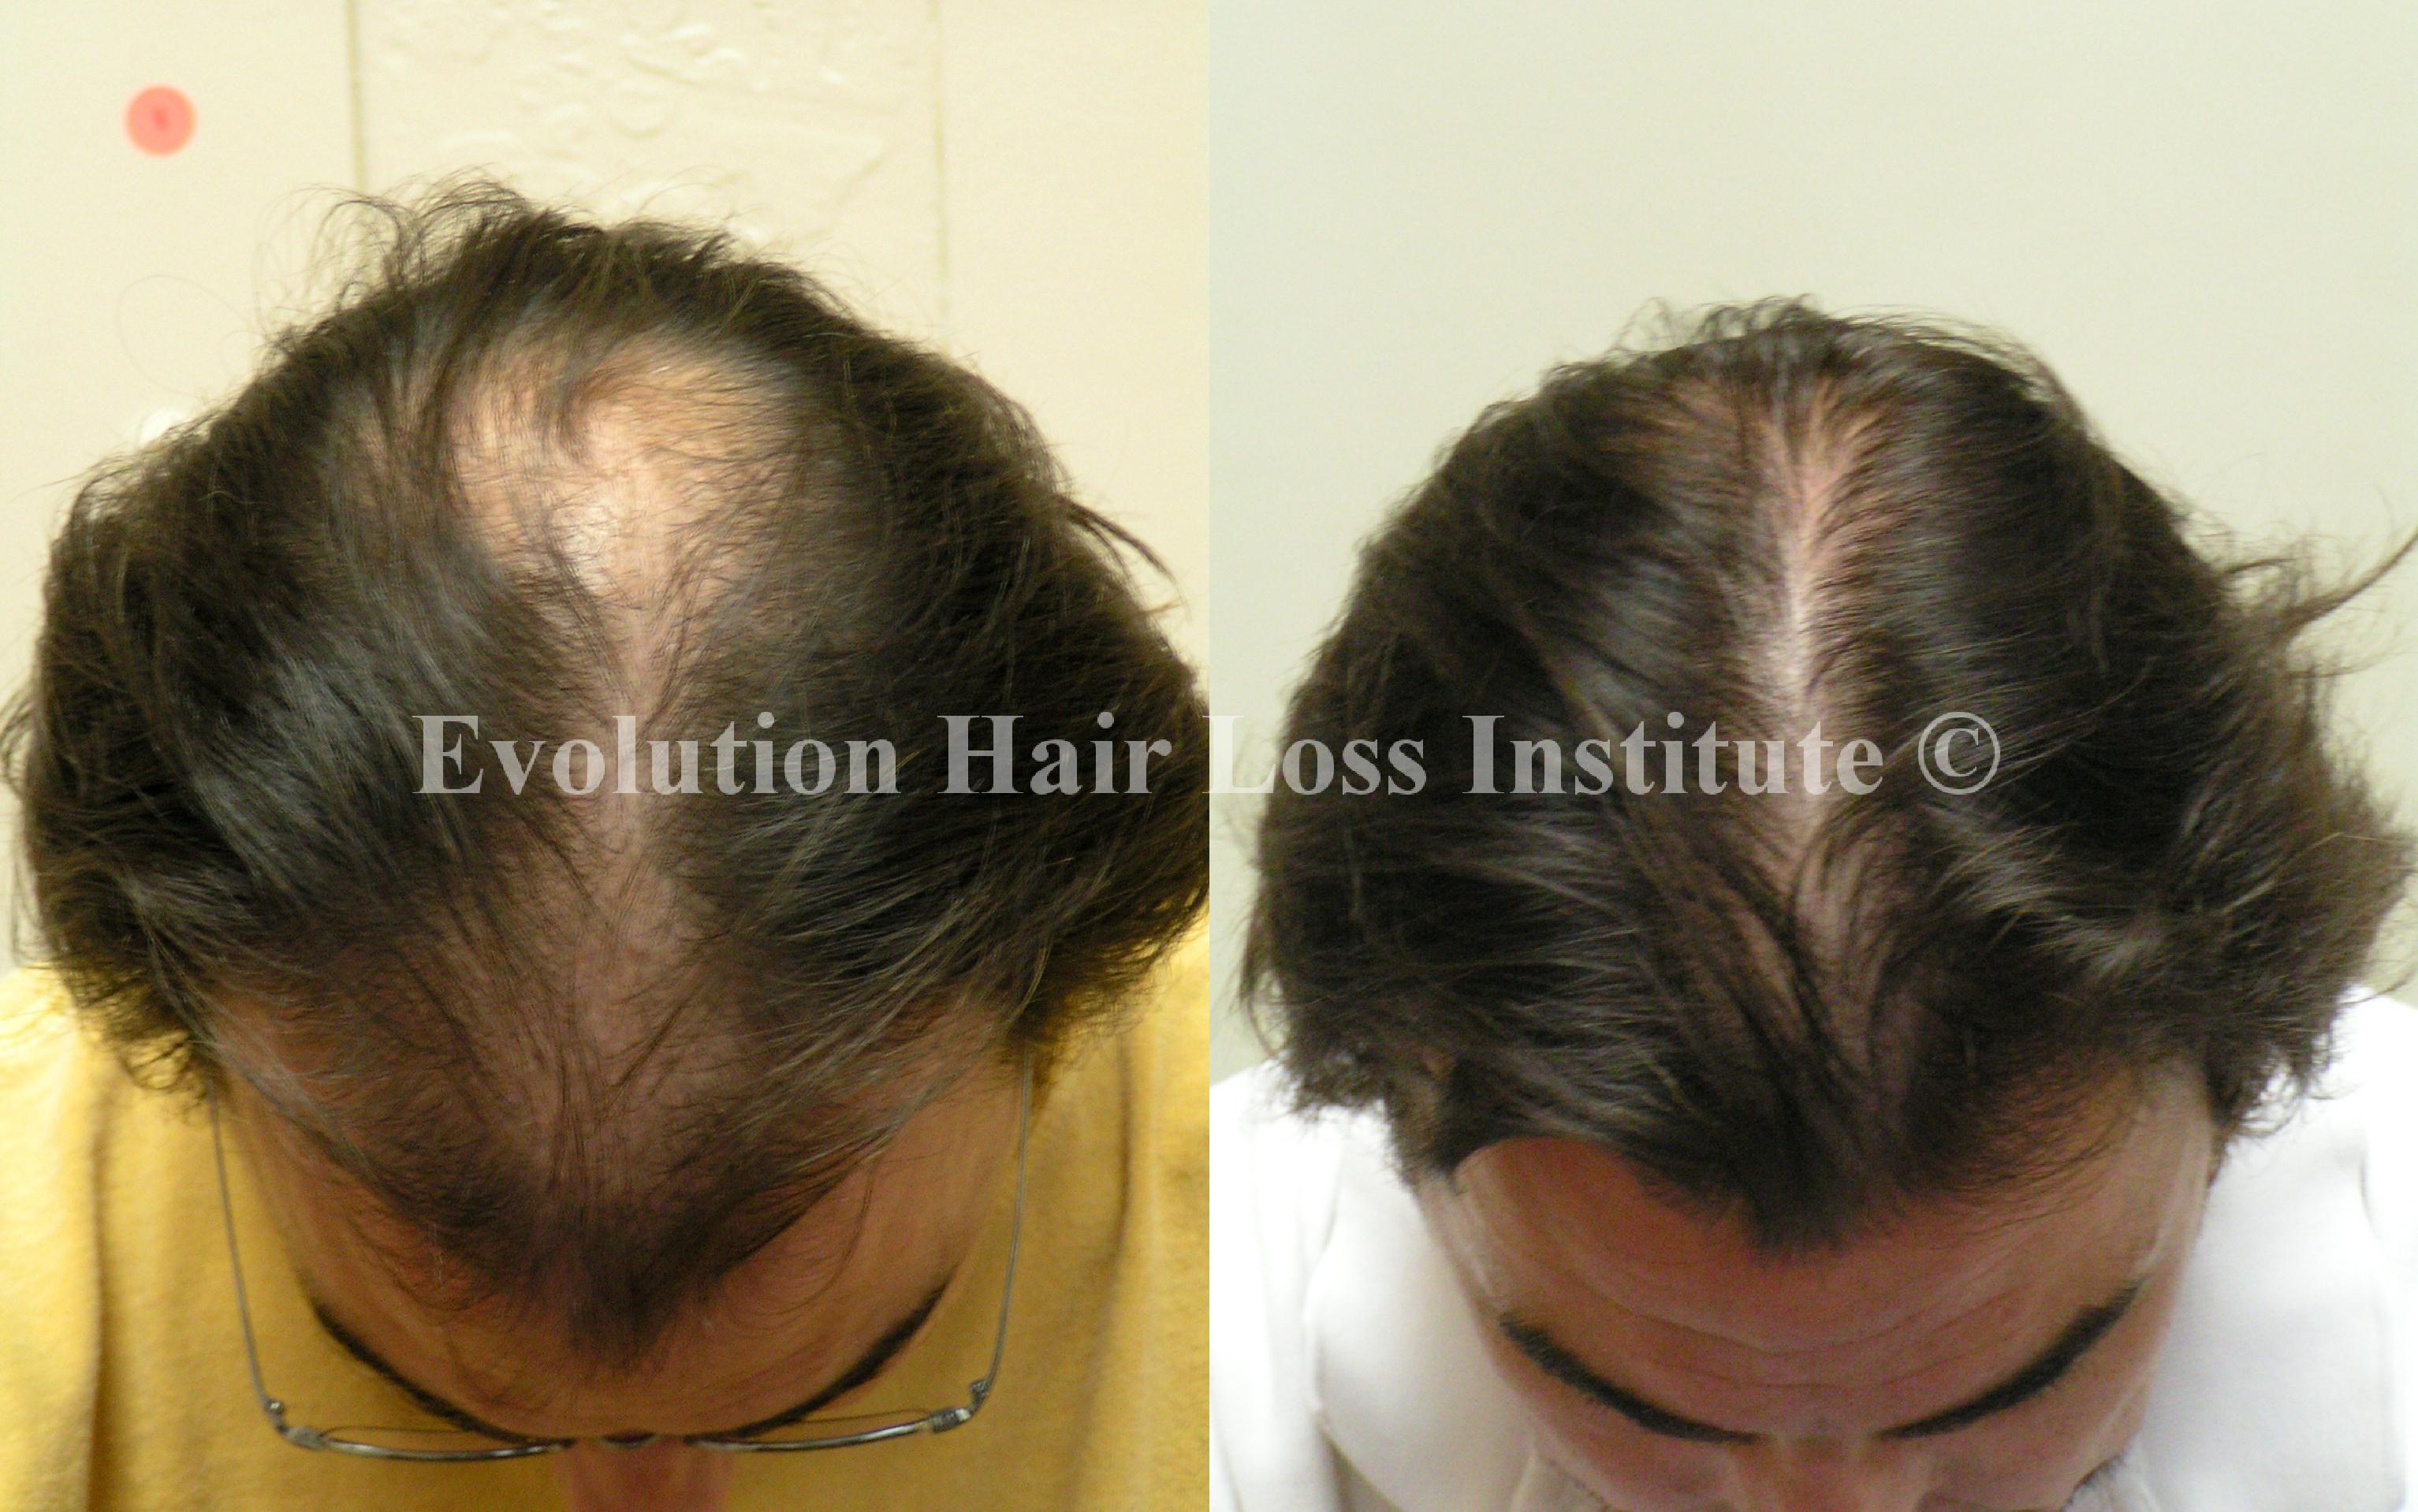 Before and After Hair Growth Treatment Photos